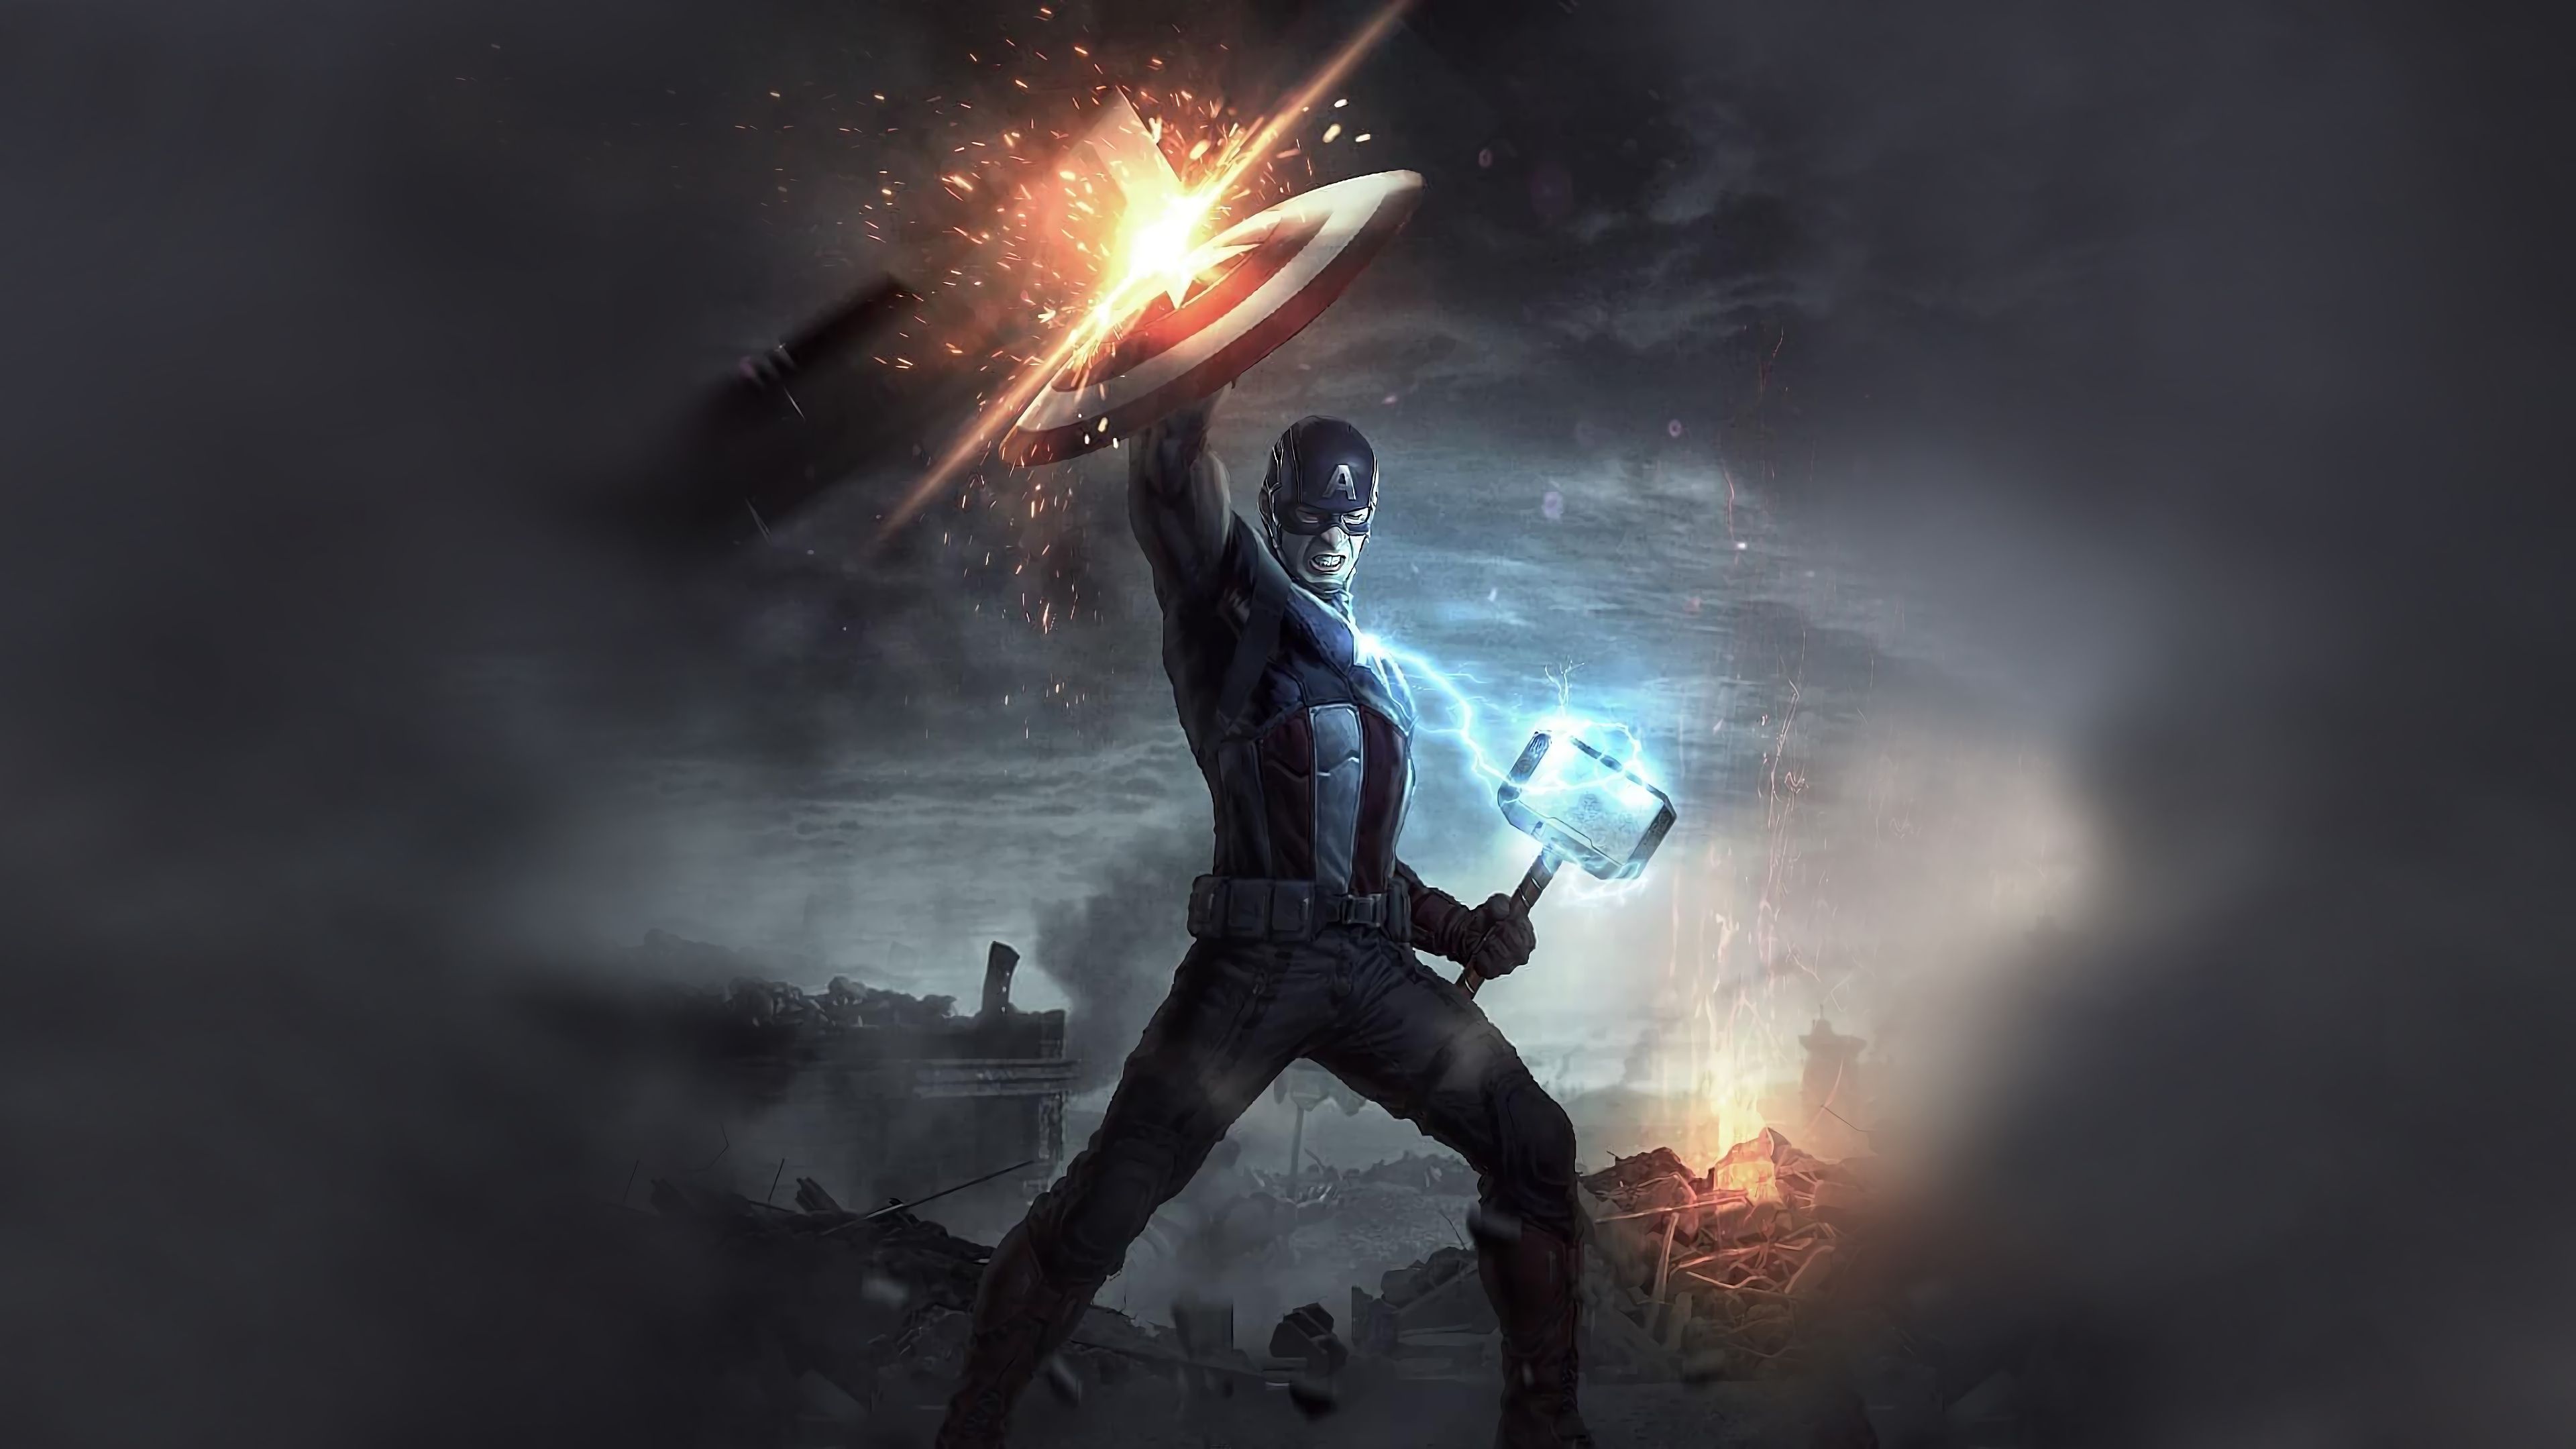 Captain America Mjolnir 4k, HD Superheroes, 4k Wallpaper, Image, Background, Photo and Picture